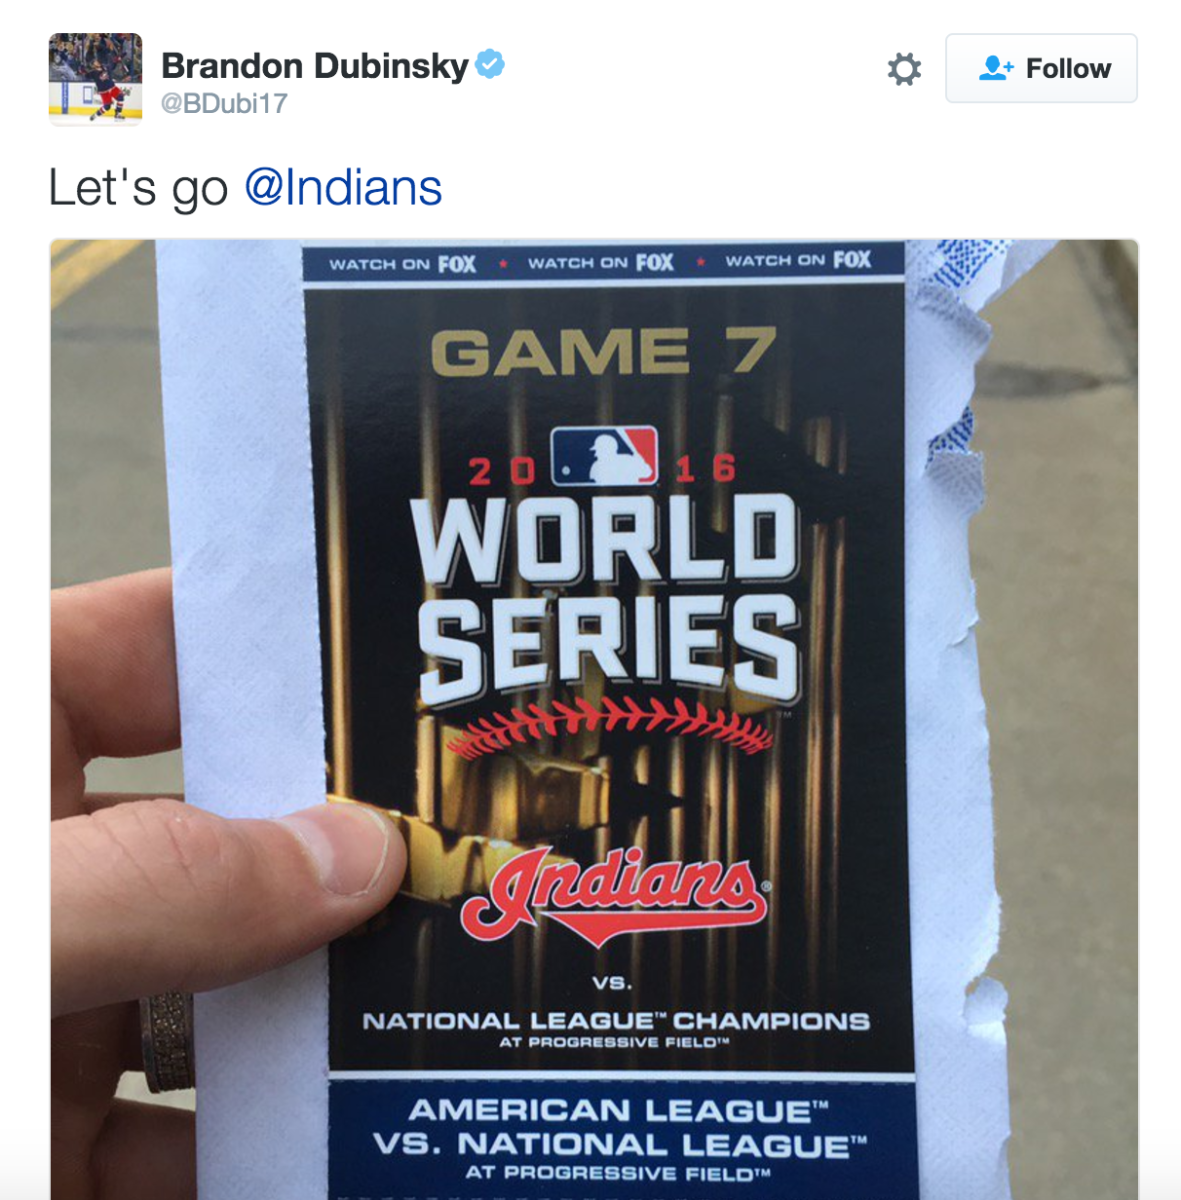 An NHL player shows his Game 7 ticket for the World Series.